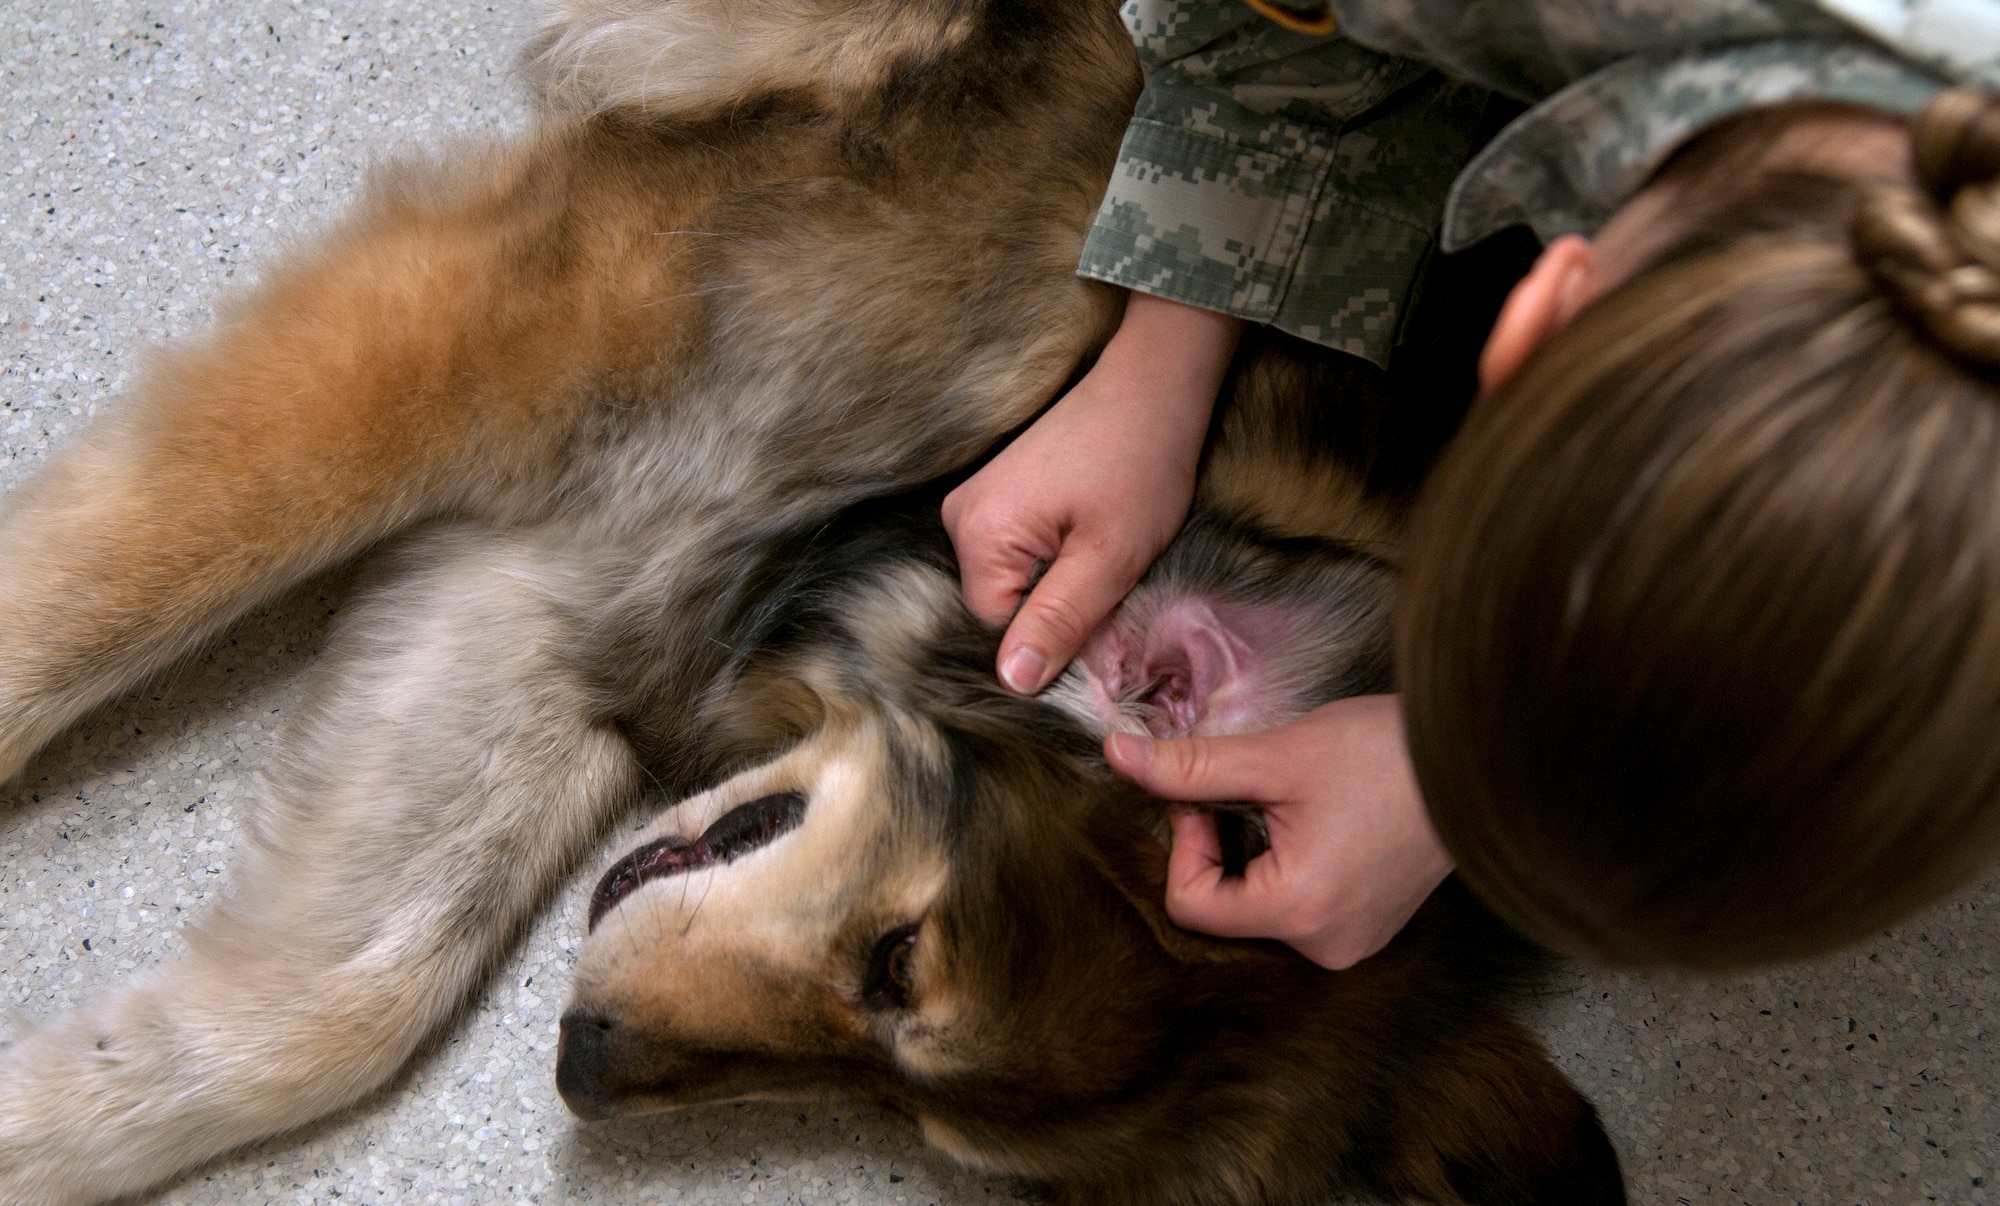 Army Capt. Shannon Mclean, U.S. Army Veterinary Treatment Facility officer in charge and veterinarian on F.E. Warren Air Force Base, Wyo., examines the ear canal of Kady, a seven year-old Saint Bernard Jan. 13, 2015. Medical examinations of pets are recommended once a year to ensure they remain healthy. (U.S. Air Force Photo/Airman 1st Class Brandon Valle)